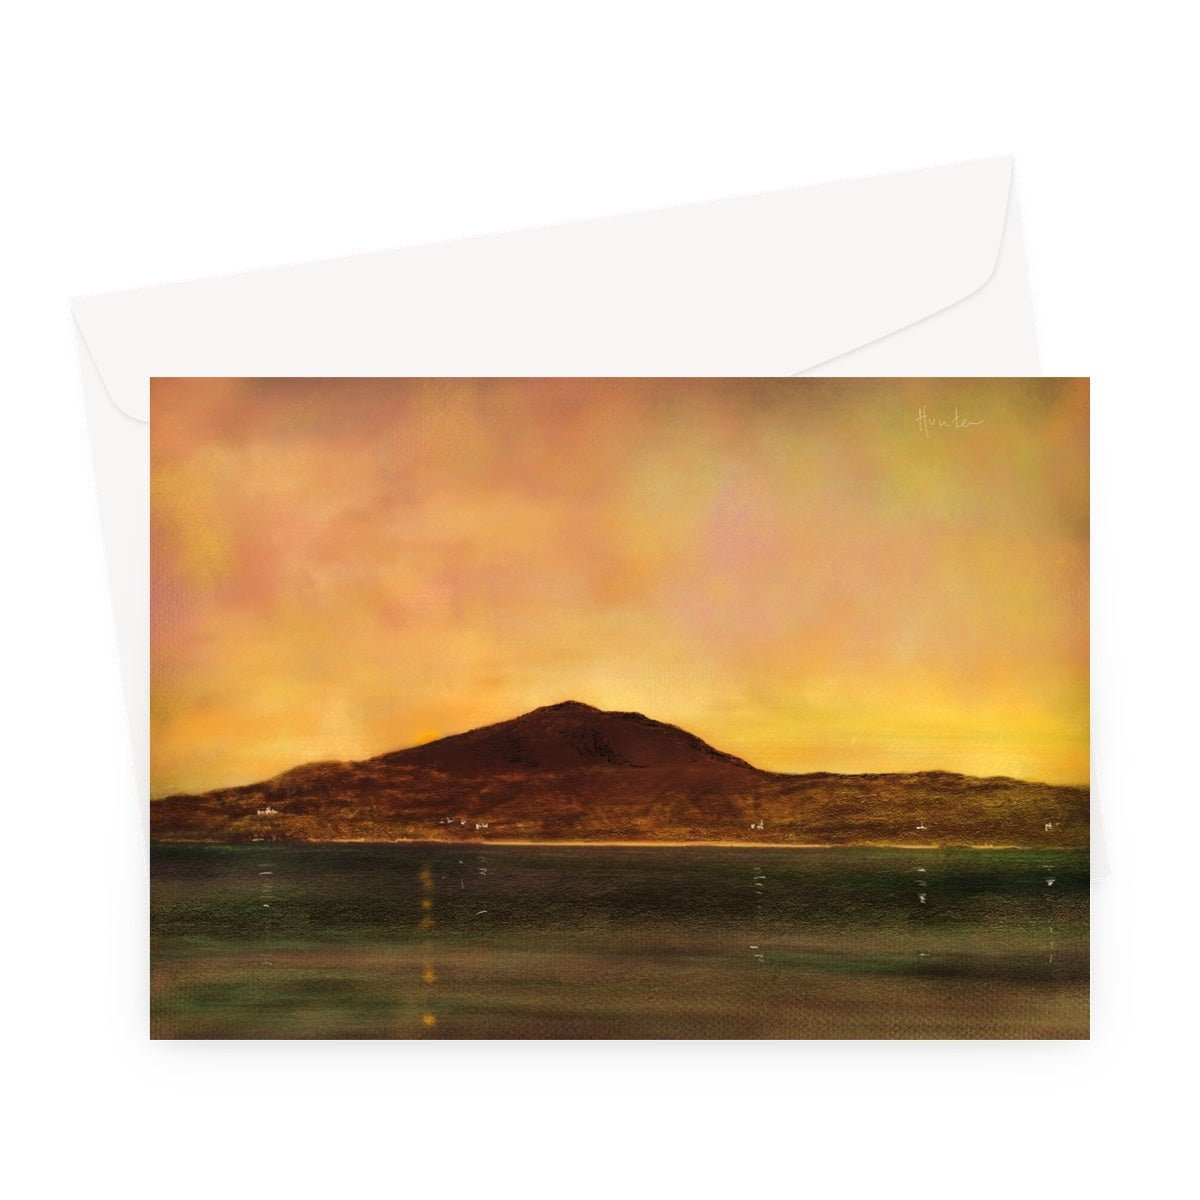 Eriskay Dusk Art Gifts Greeting Card-Greetings Cards-Hebridean Islands Art Gallery-A5 Landscape-1 Card-Paintings, Prints, Homeware, Art Gifts From Scotland By Scottish Artist Kevin Hunter